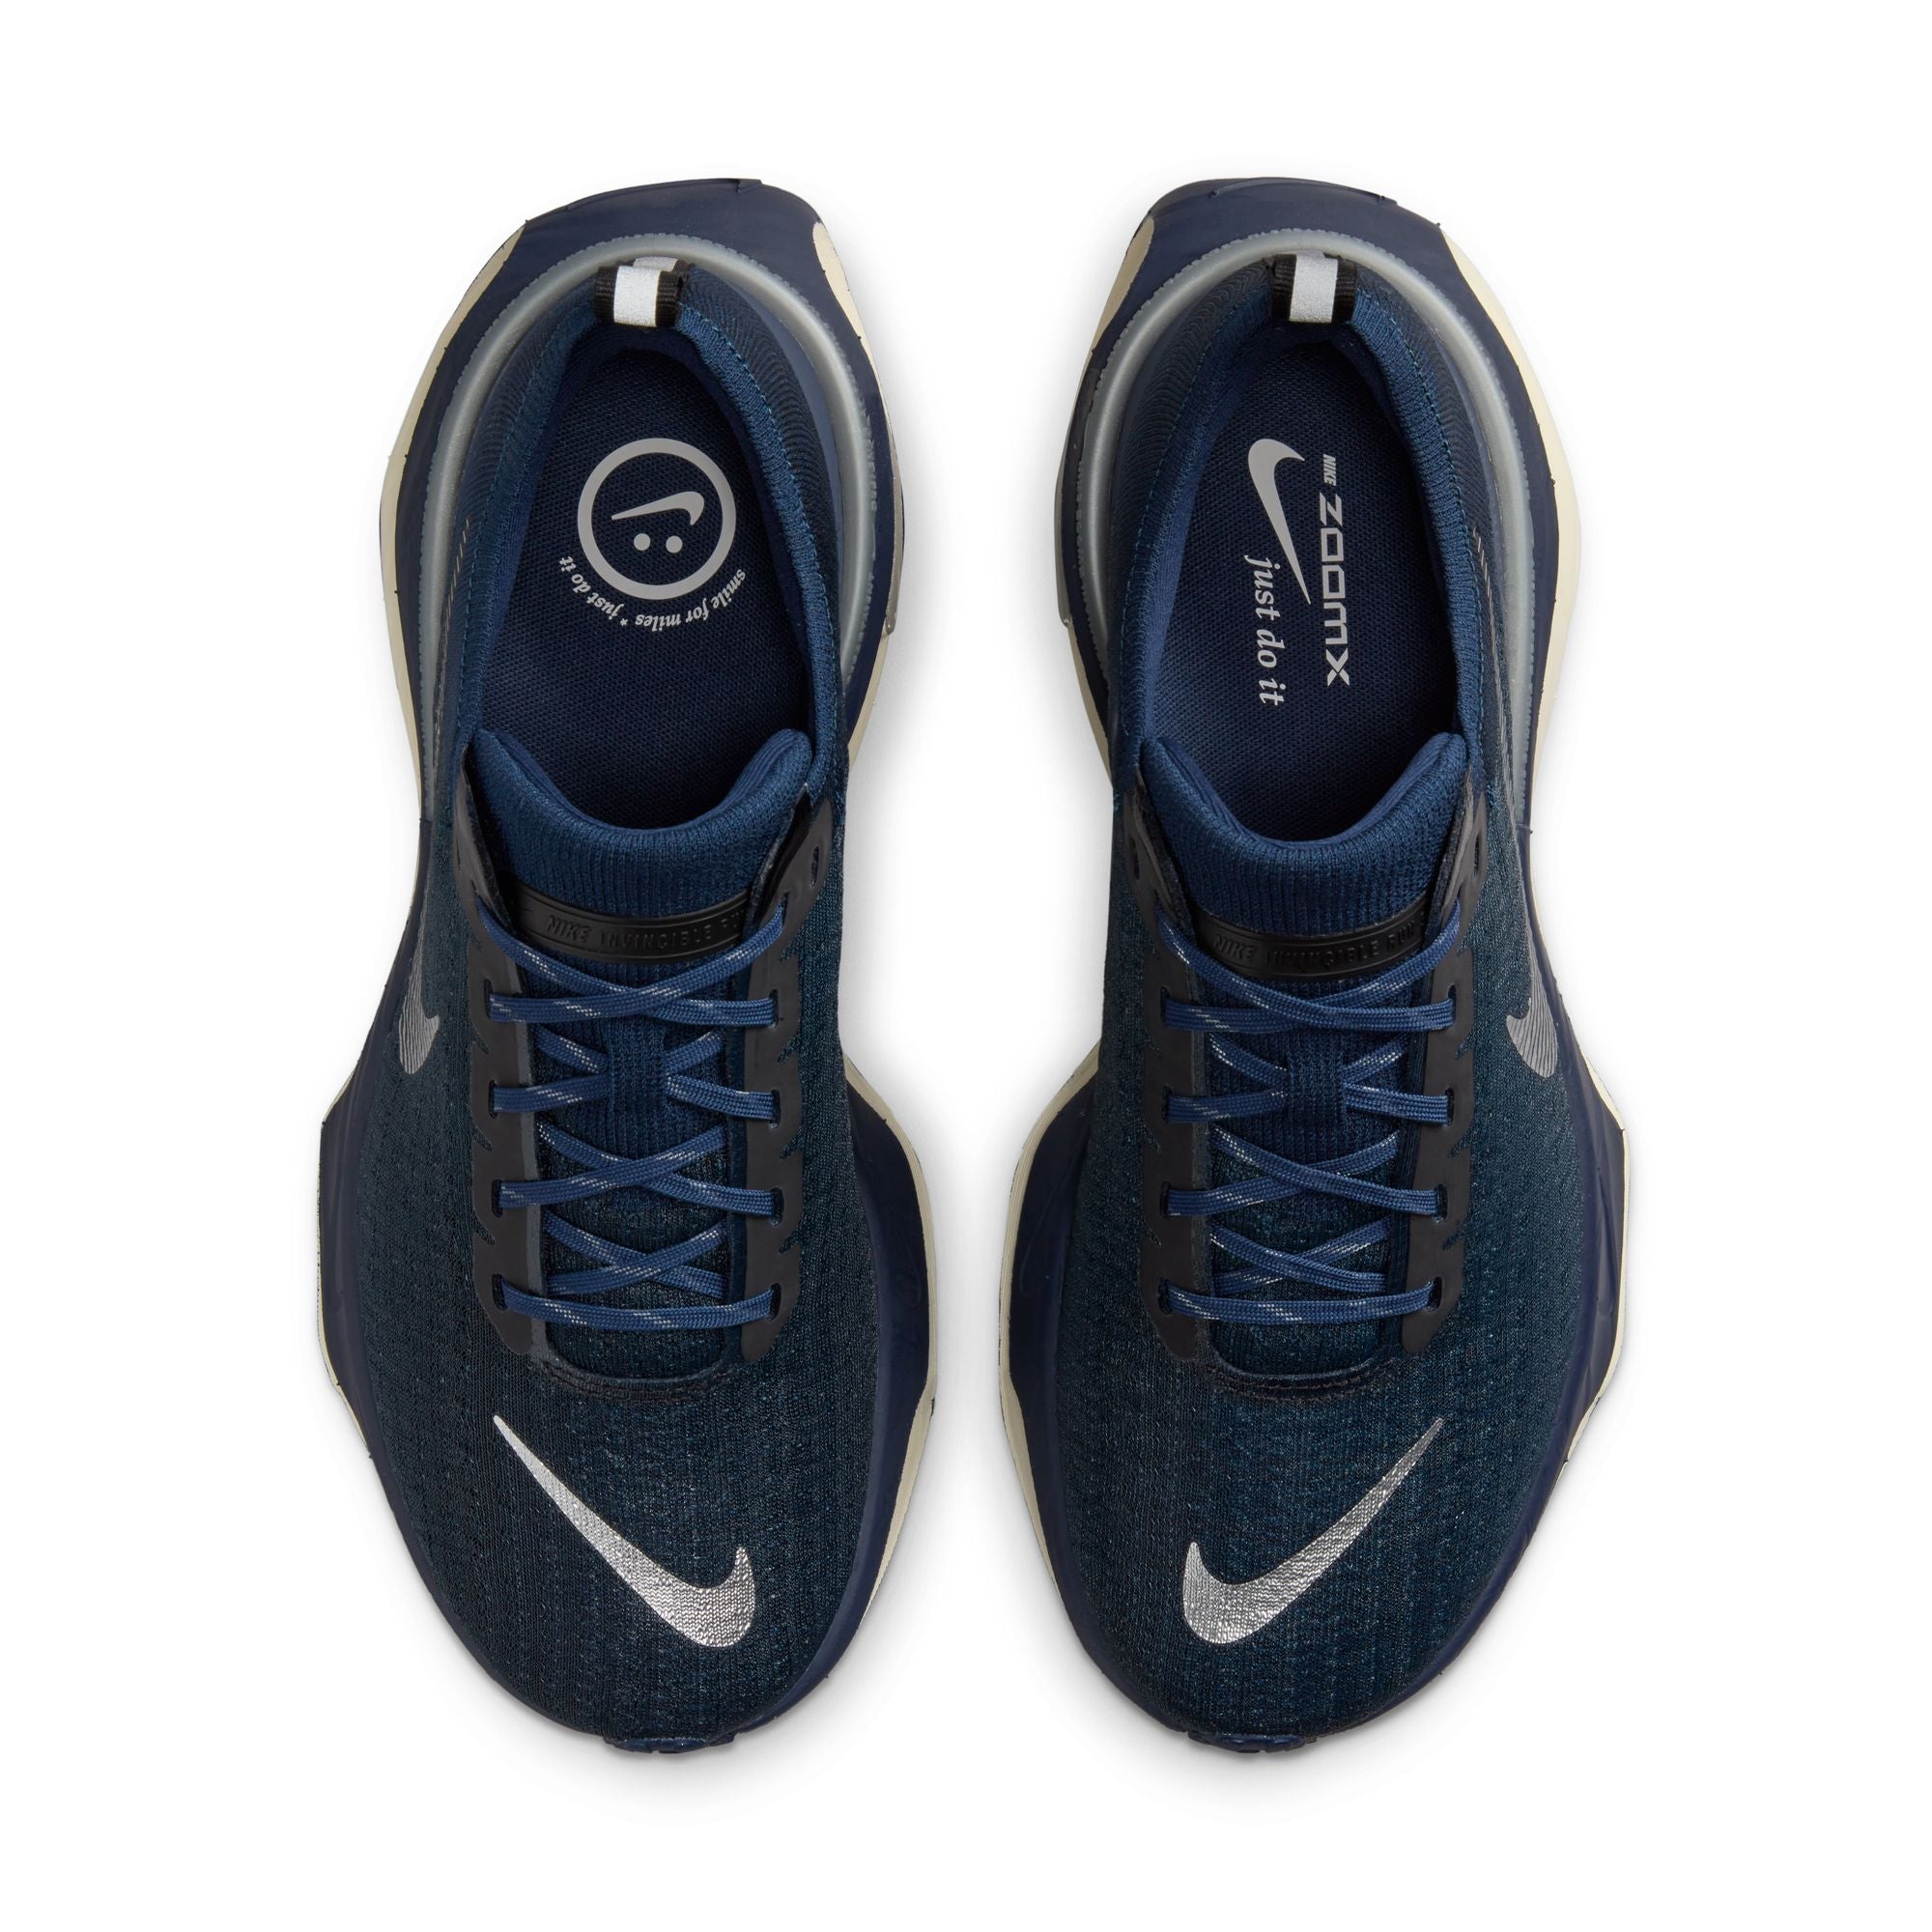 When viewing the Men's Nike Invincible from above the flared forefoot can be seen along with a fast looking swoosh above the toes